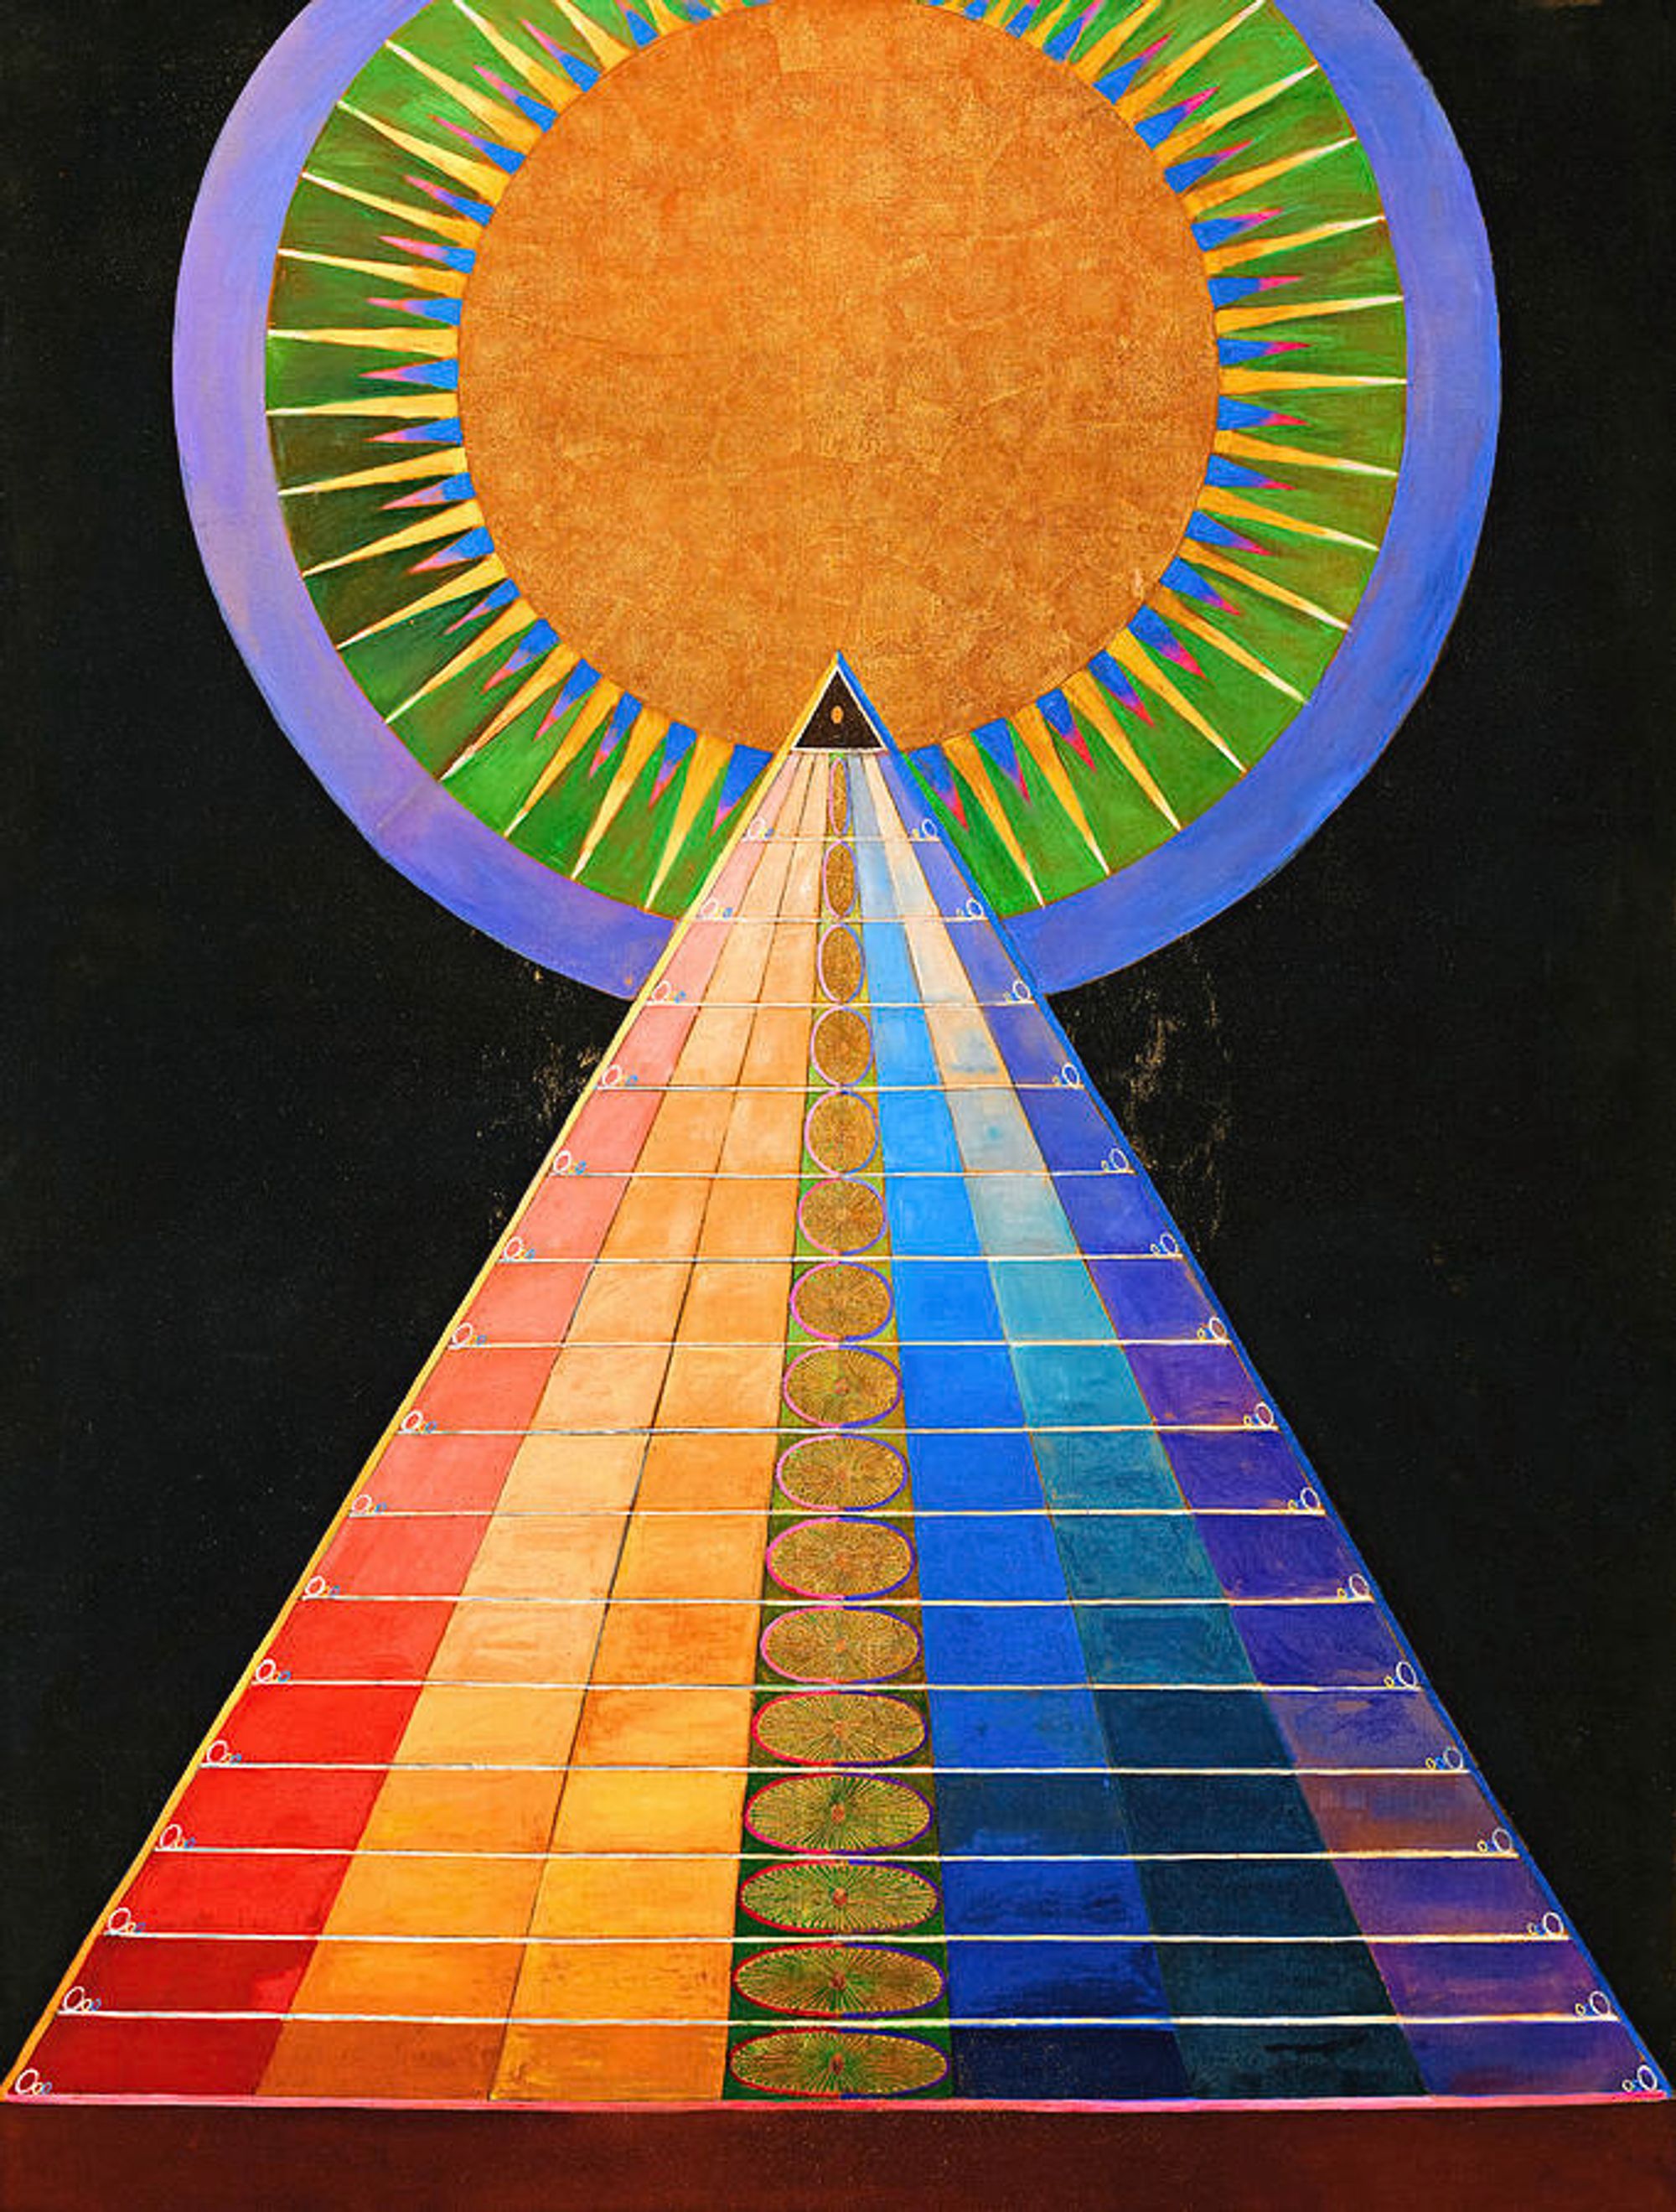 Abstract pyramid painting entitled "Altarpiece No. 1, Group X" by Hilma Van Klimpt